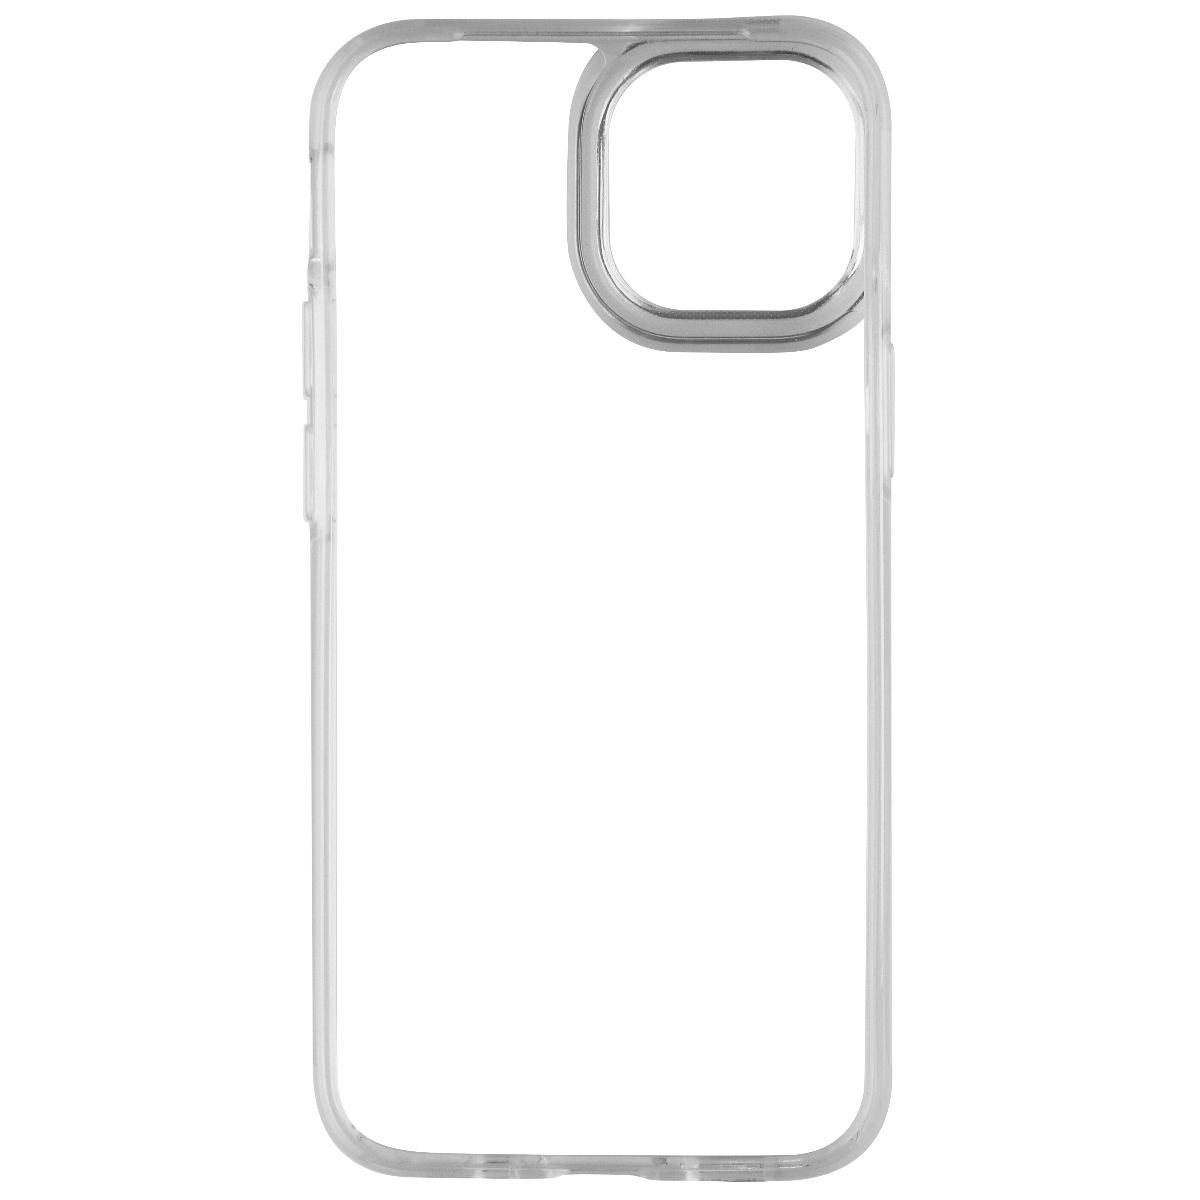 Tech21 EvoCheck Series Case For Apple IPhone 14 Pro Max - Clear (Refurbished)